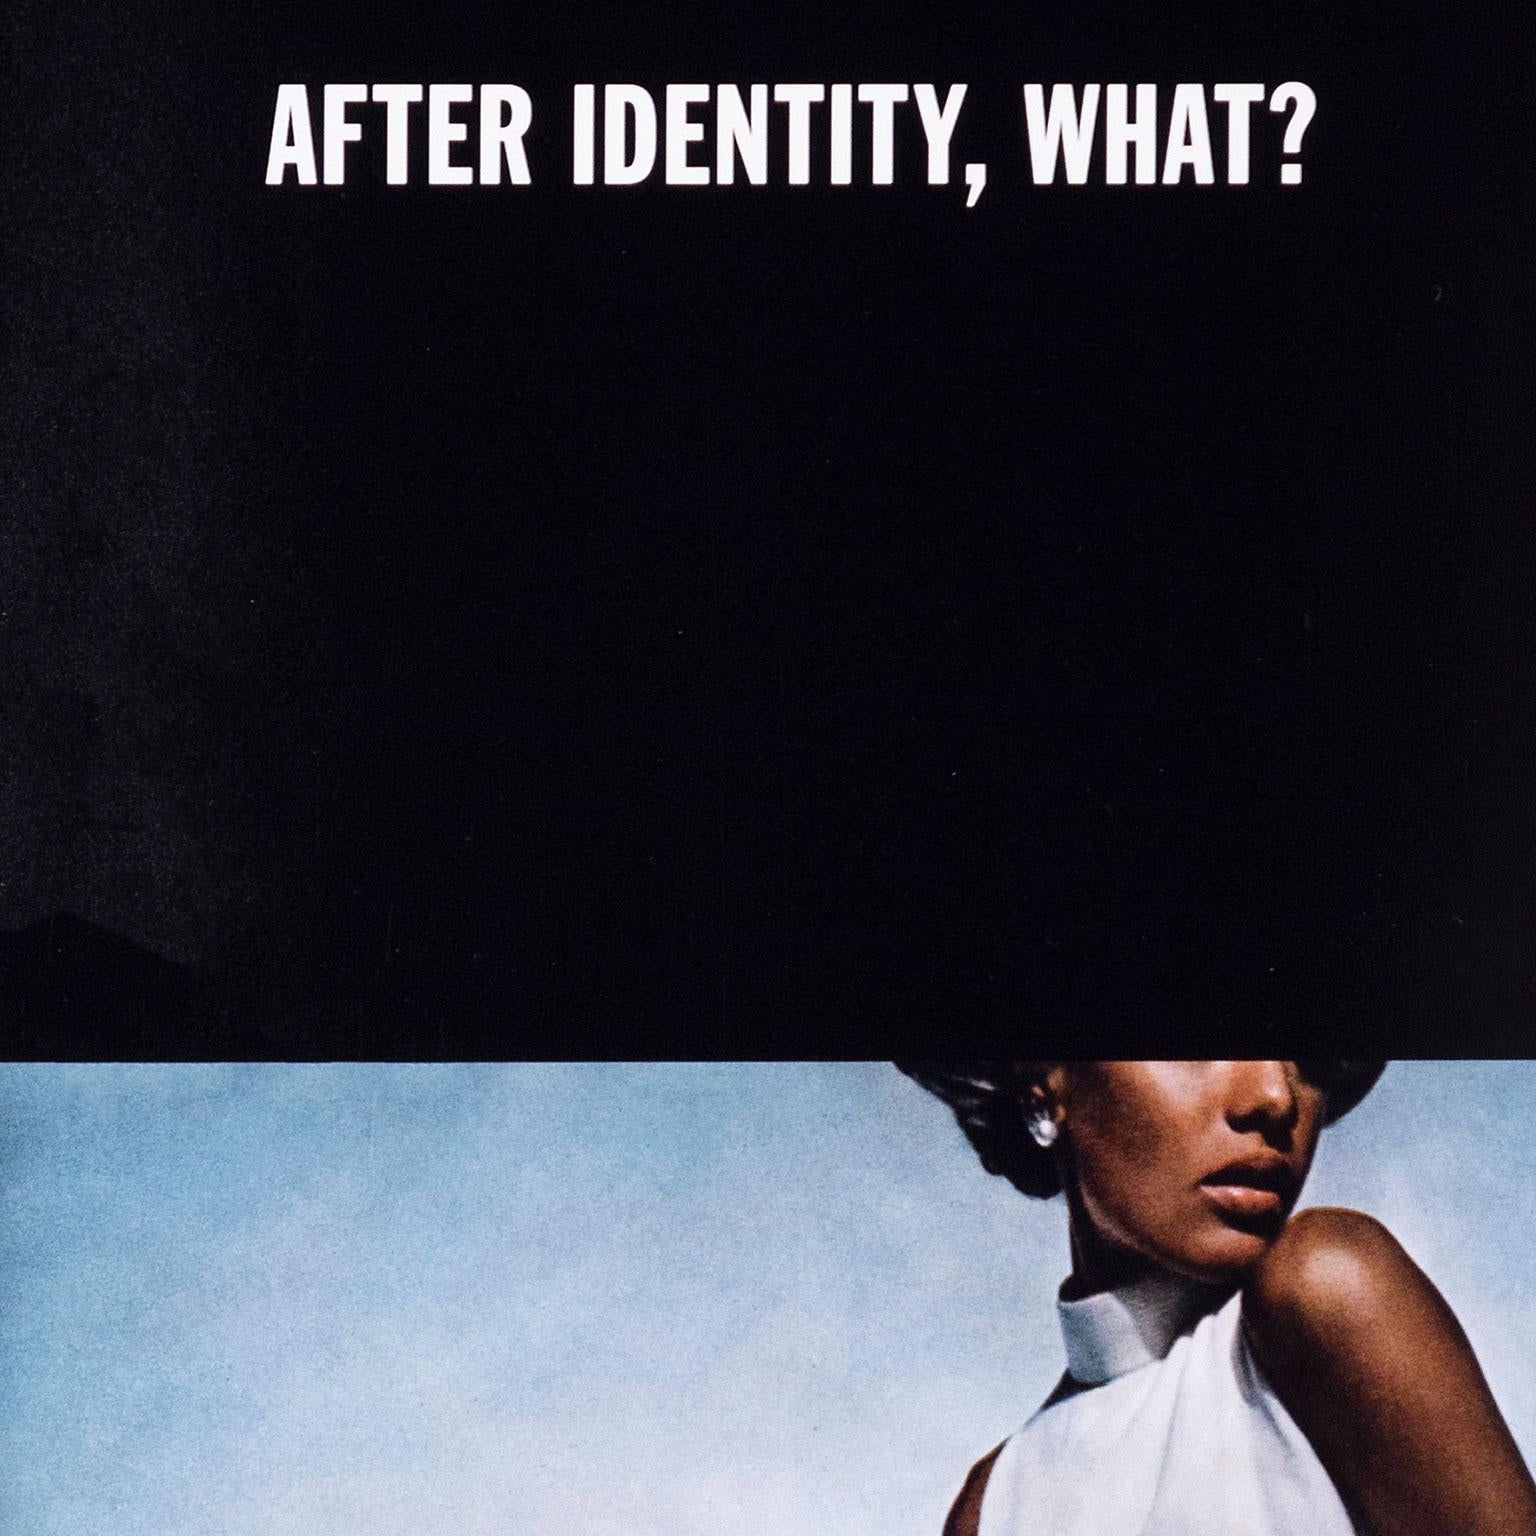 After Identity, What? - Contemporary Print by Hank Willis Thomas